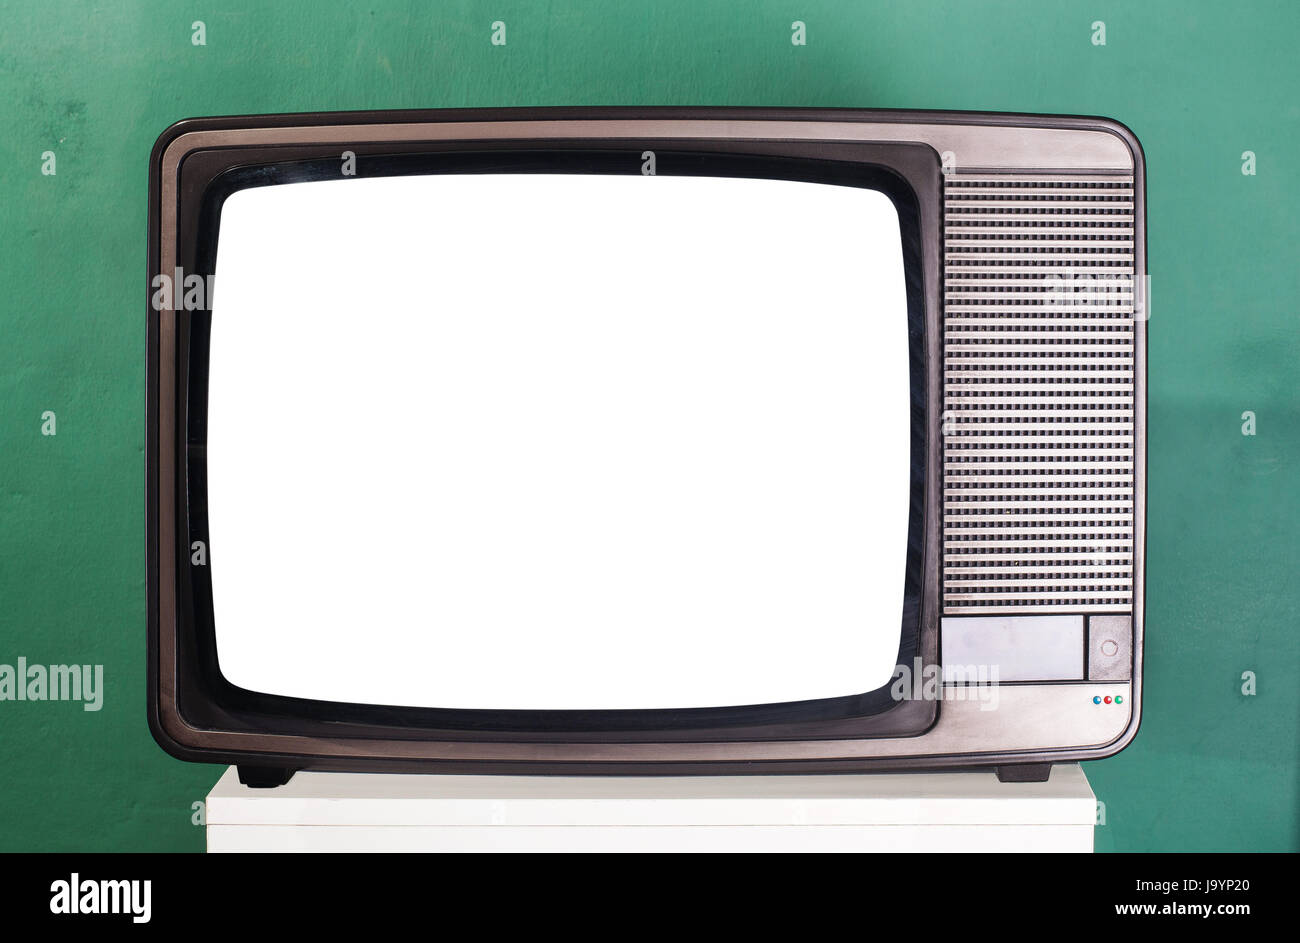 vintage, screen, television, tv, televisions, retro, old, indicate, show, Stock Photo